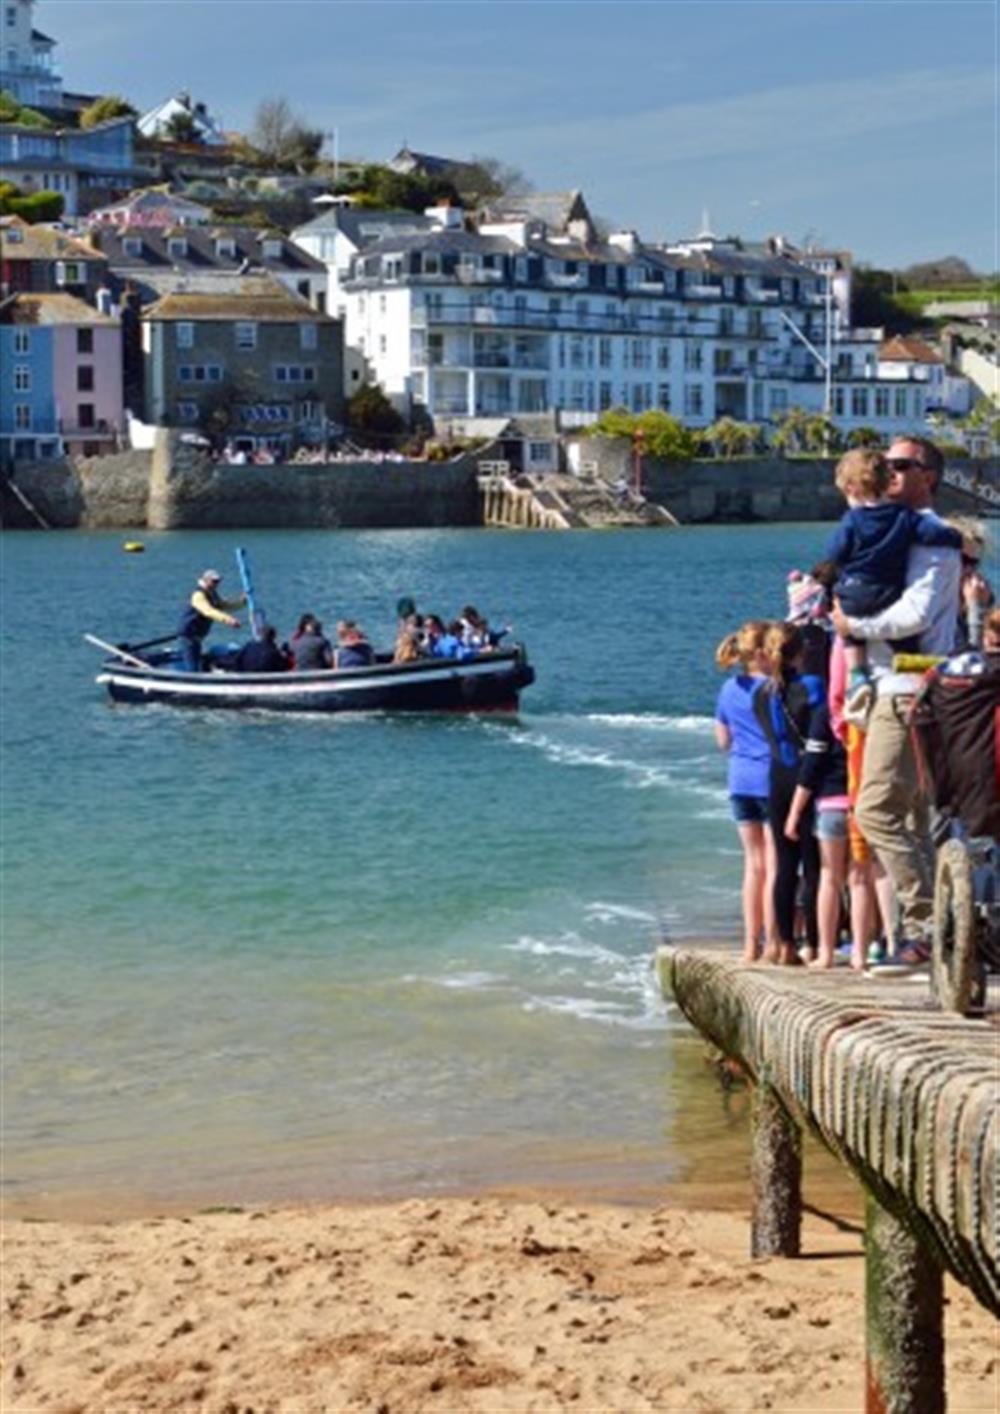 Salcombe is easily accessed by the foot ferry a five minute walk from Arran. at Arran in East Portlemouth